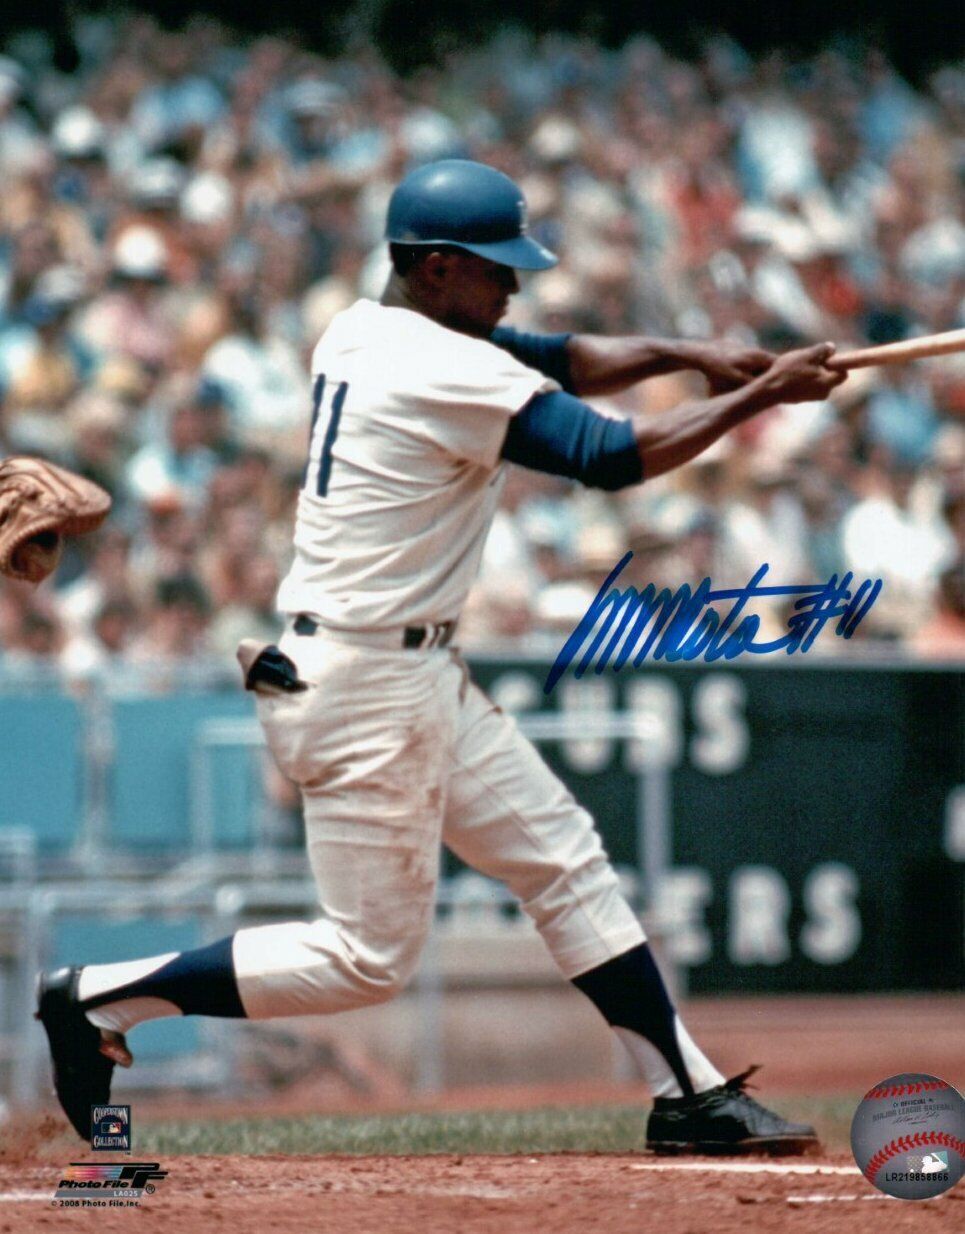 Manny Mota Signed Autographed 8X10 Photo Poster painting Dodgers Home Swing #11